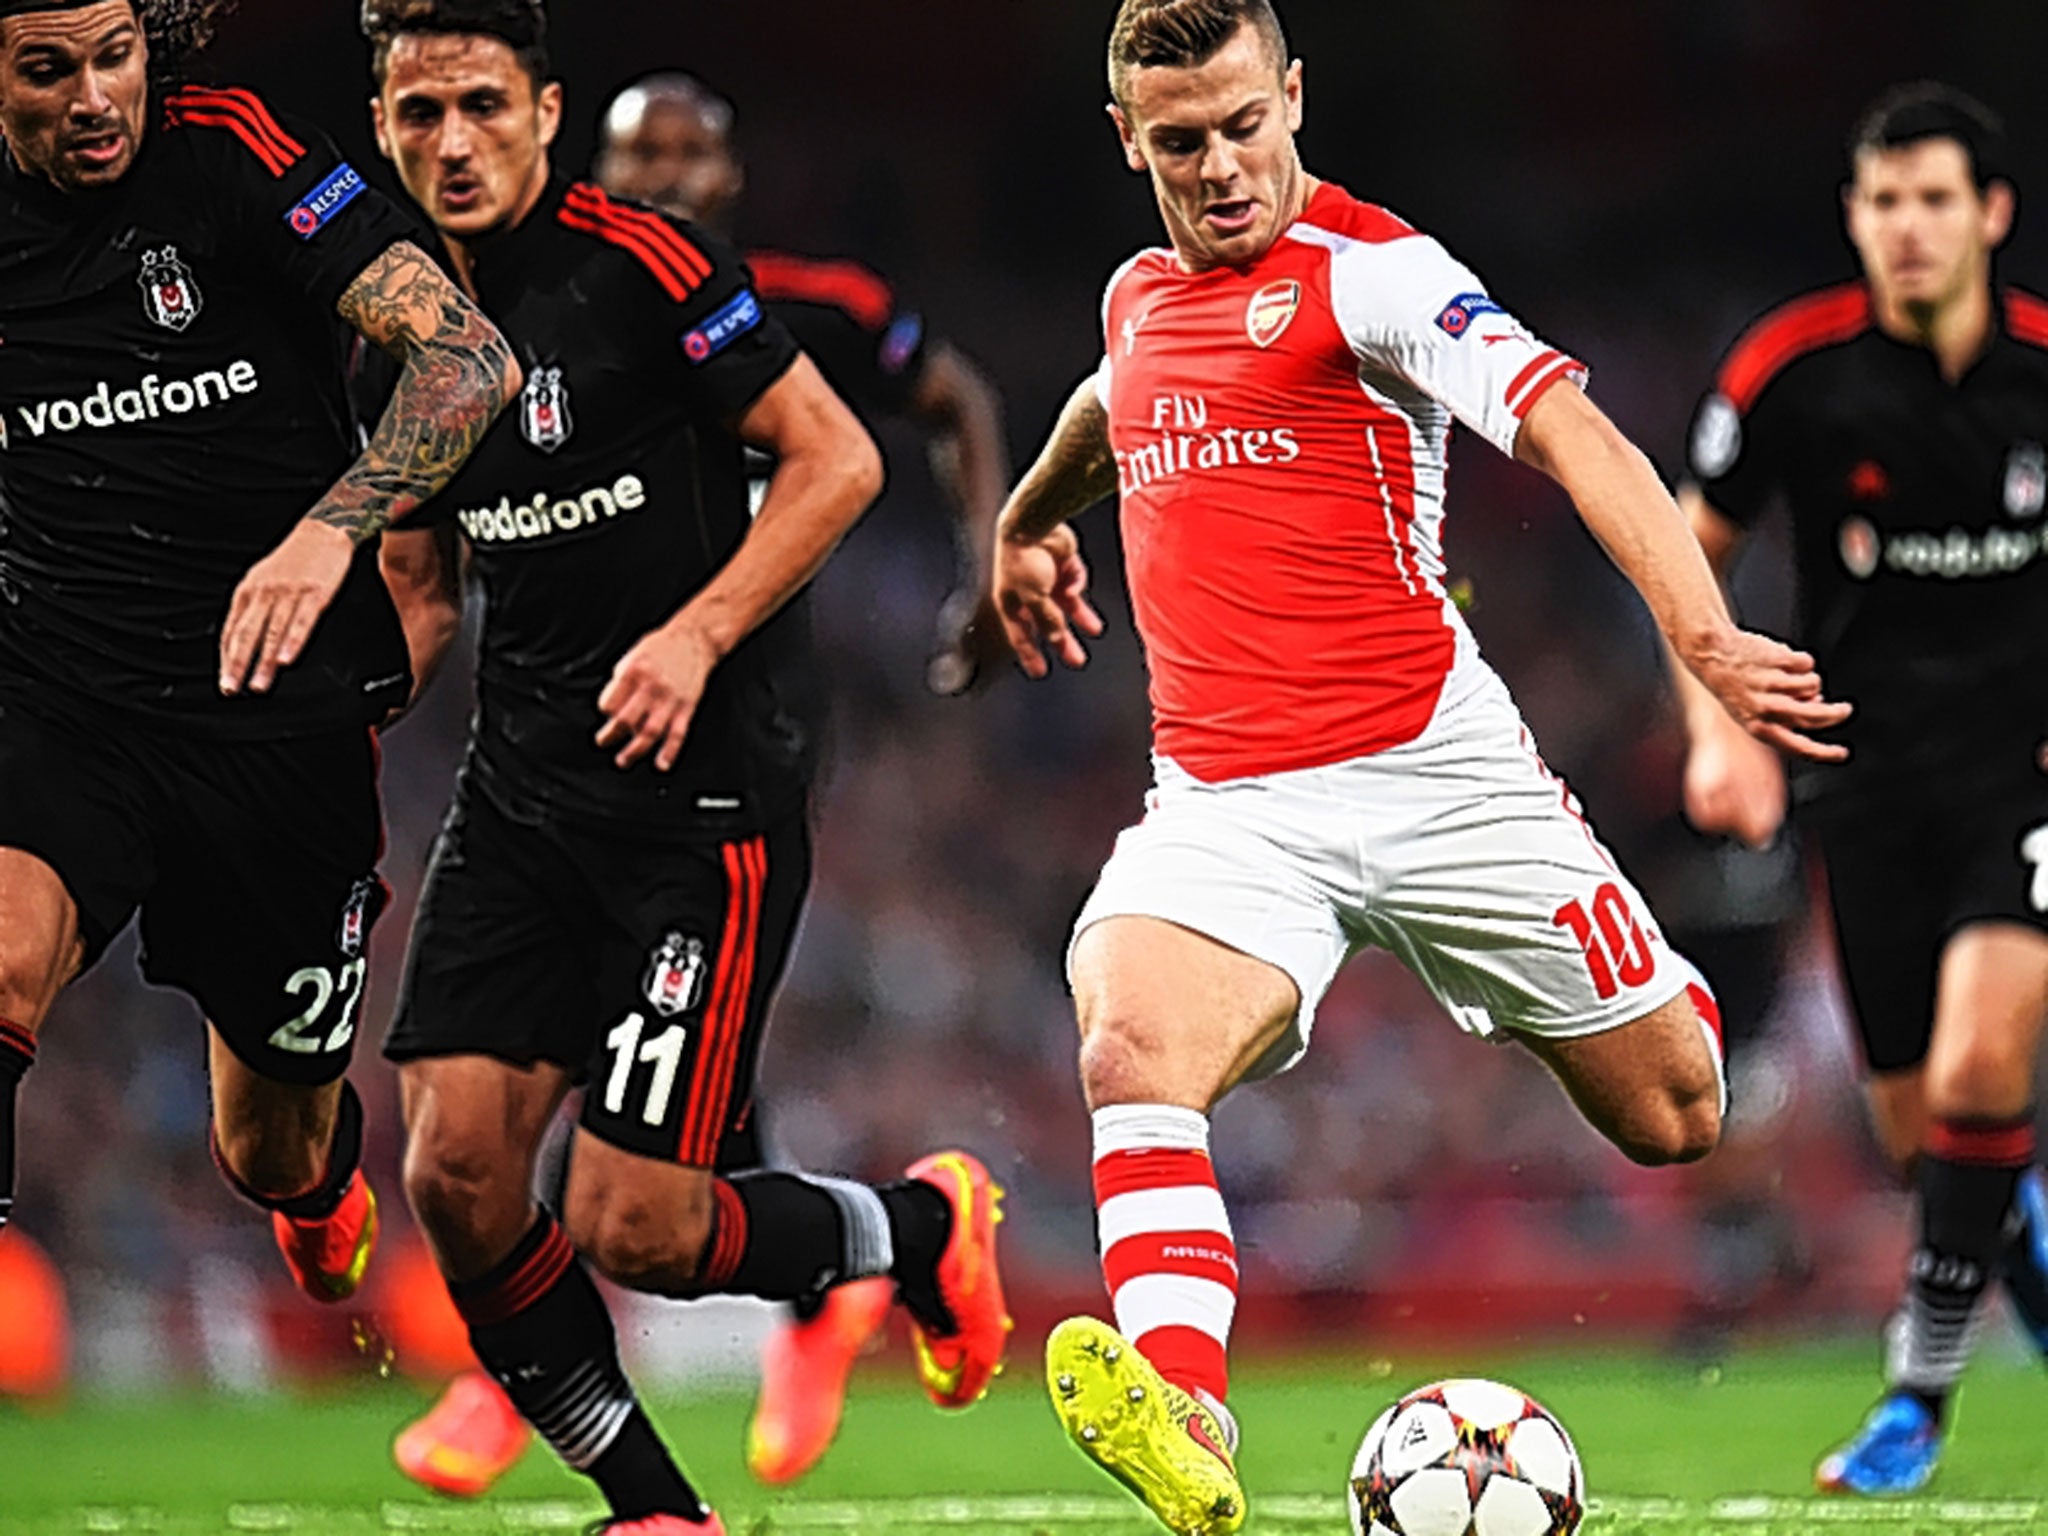 Jack Wilshere will continue to be used in a ‘provocative’ role by Arsenal after his more defensive deployment by England